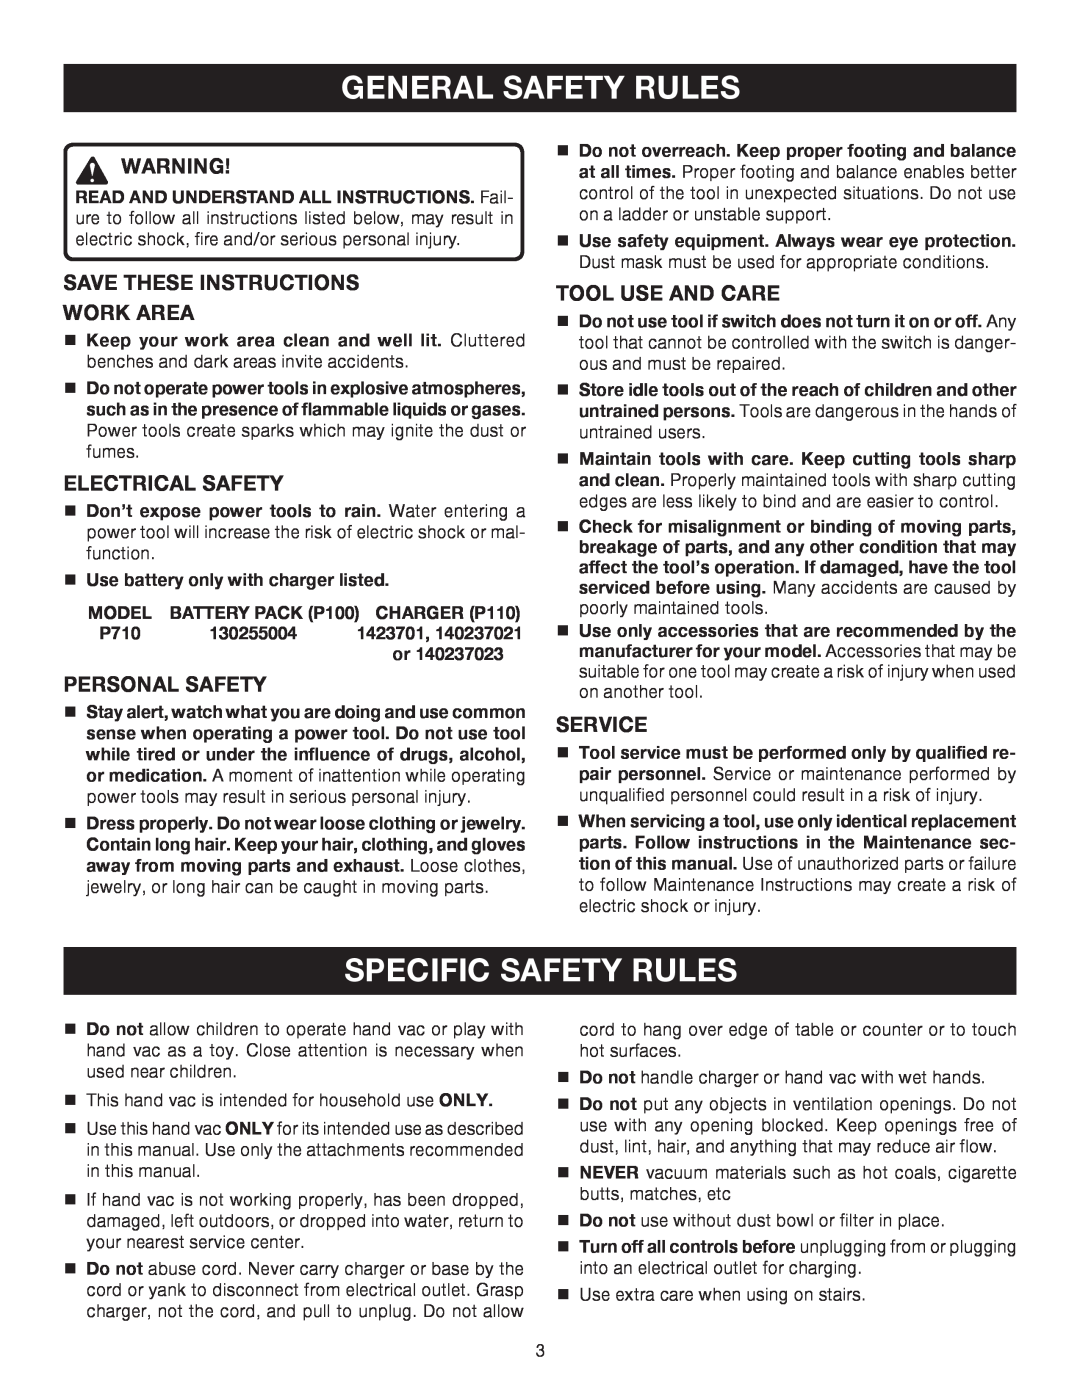 Ryobi P710 General Safety Rules, Specific Safety Rules, Save These Instructions Work Area, Electrical Safety, Service 